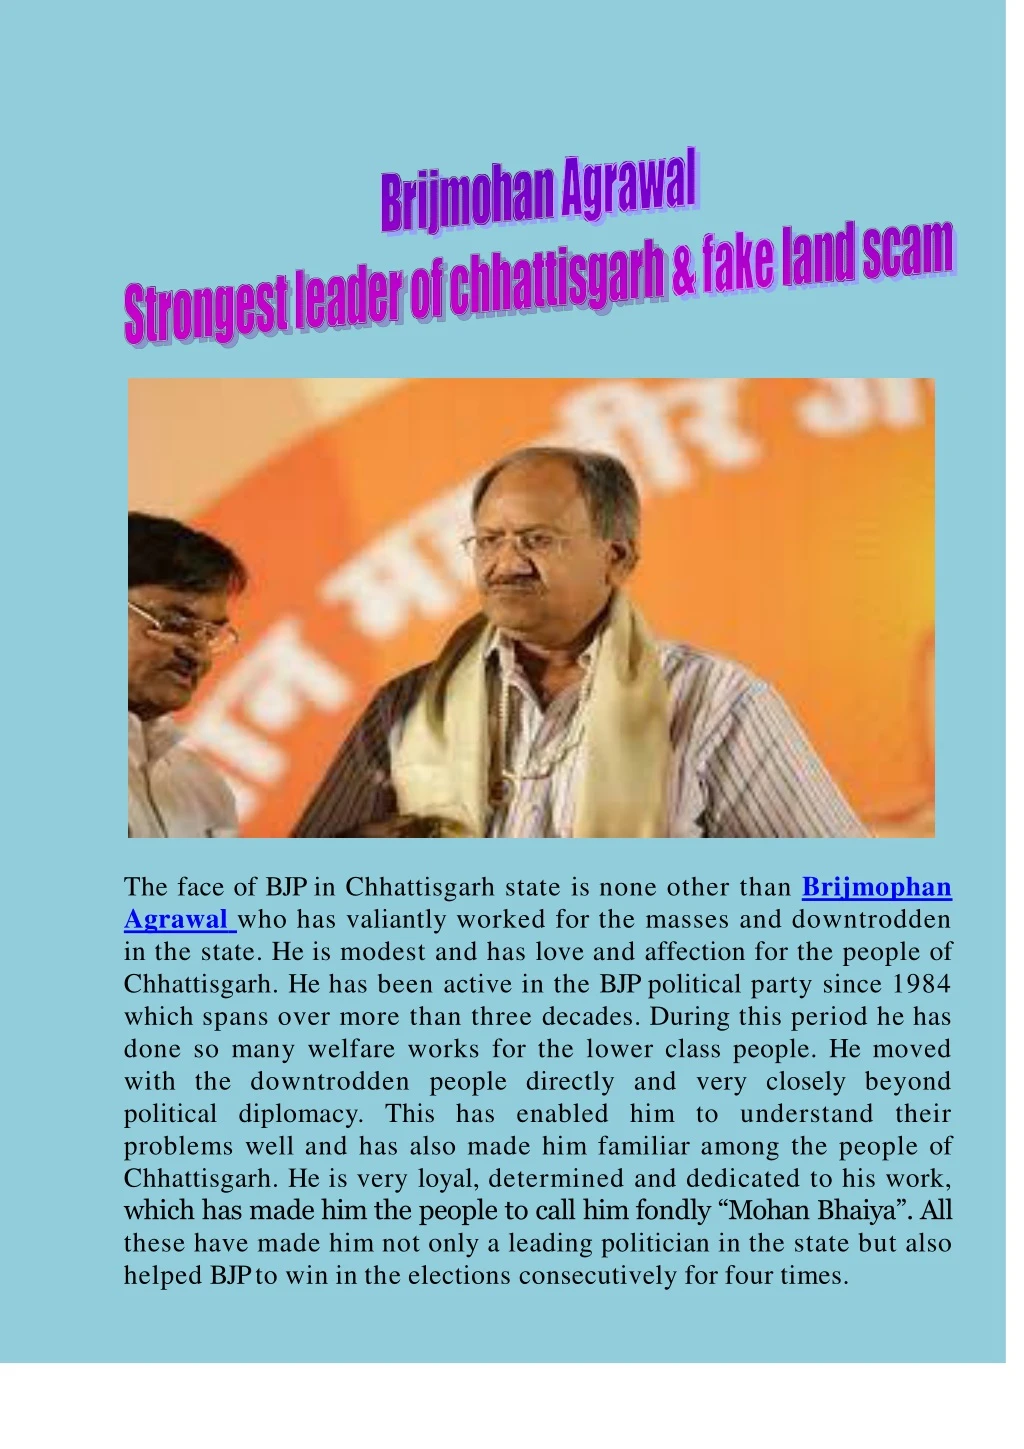 the face of bjp in chhattisgarh state is none